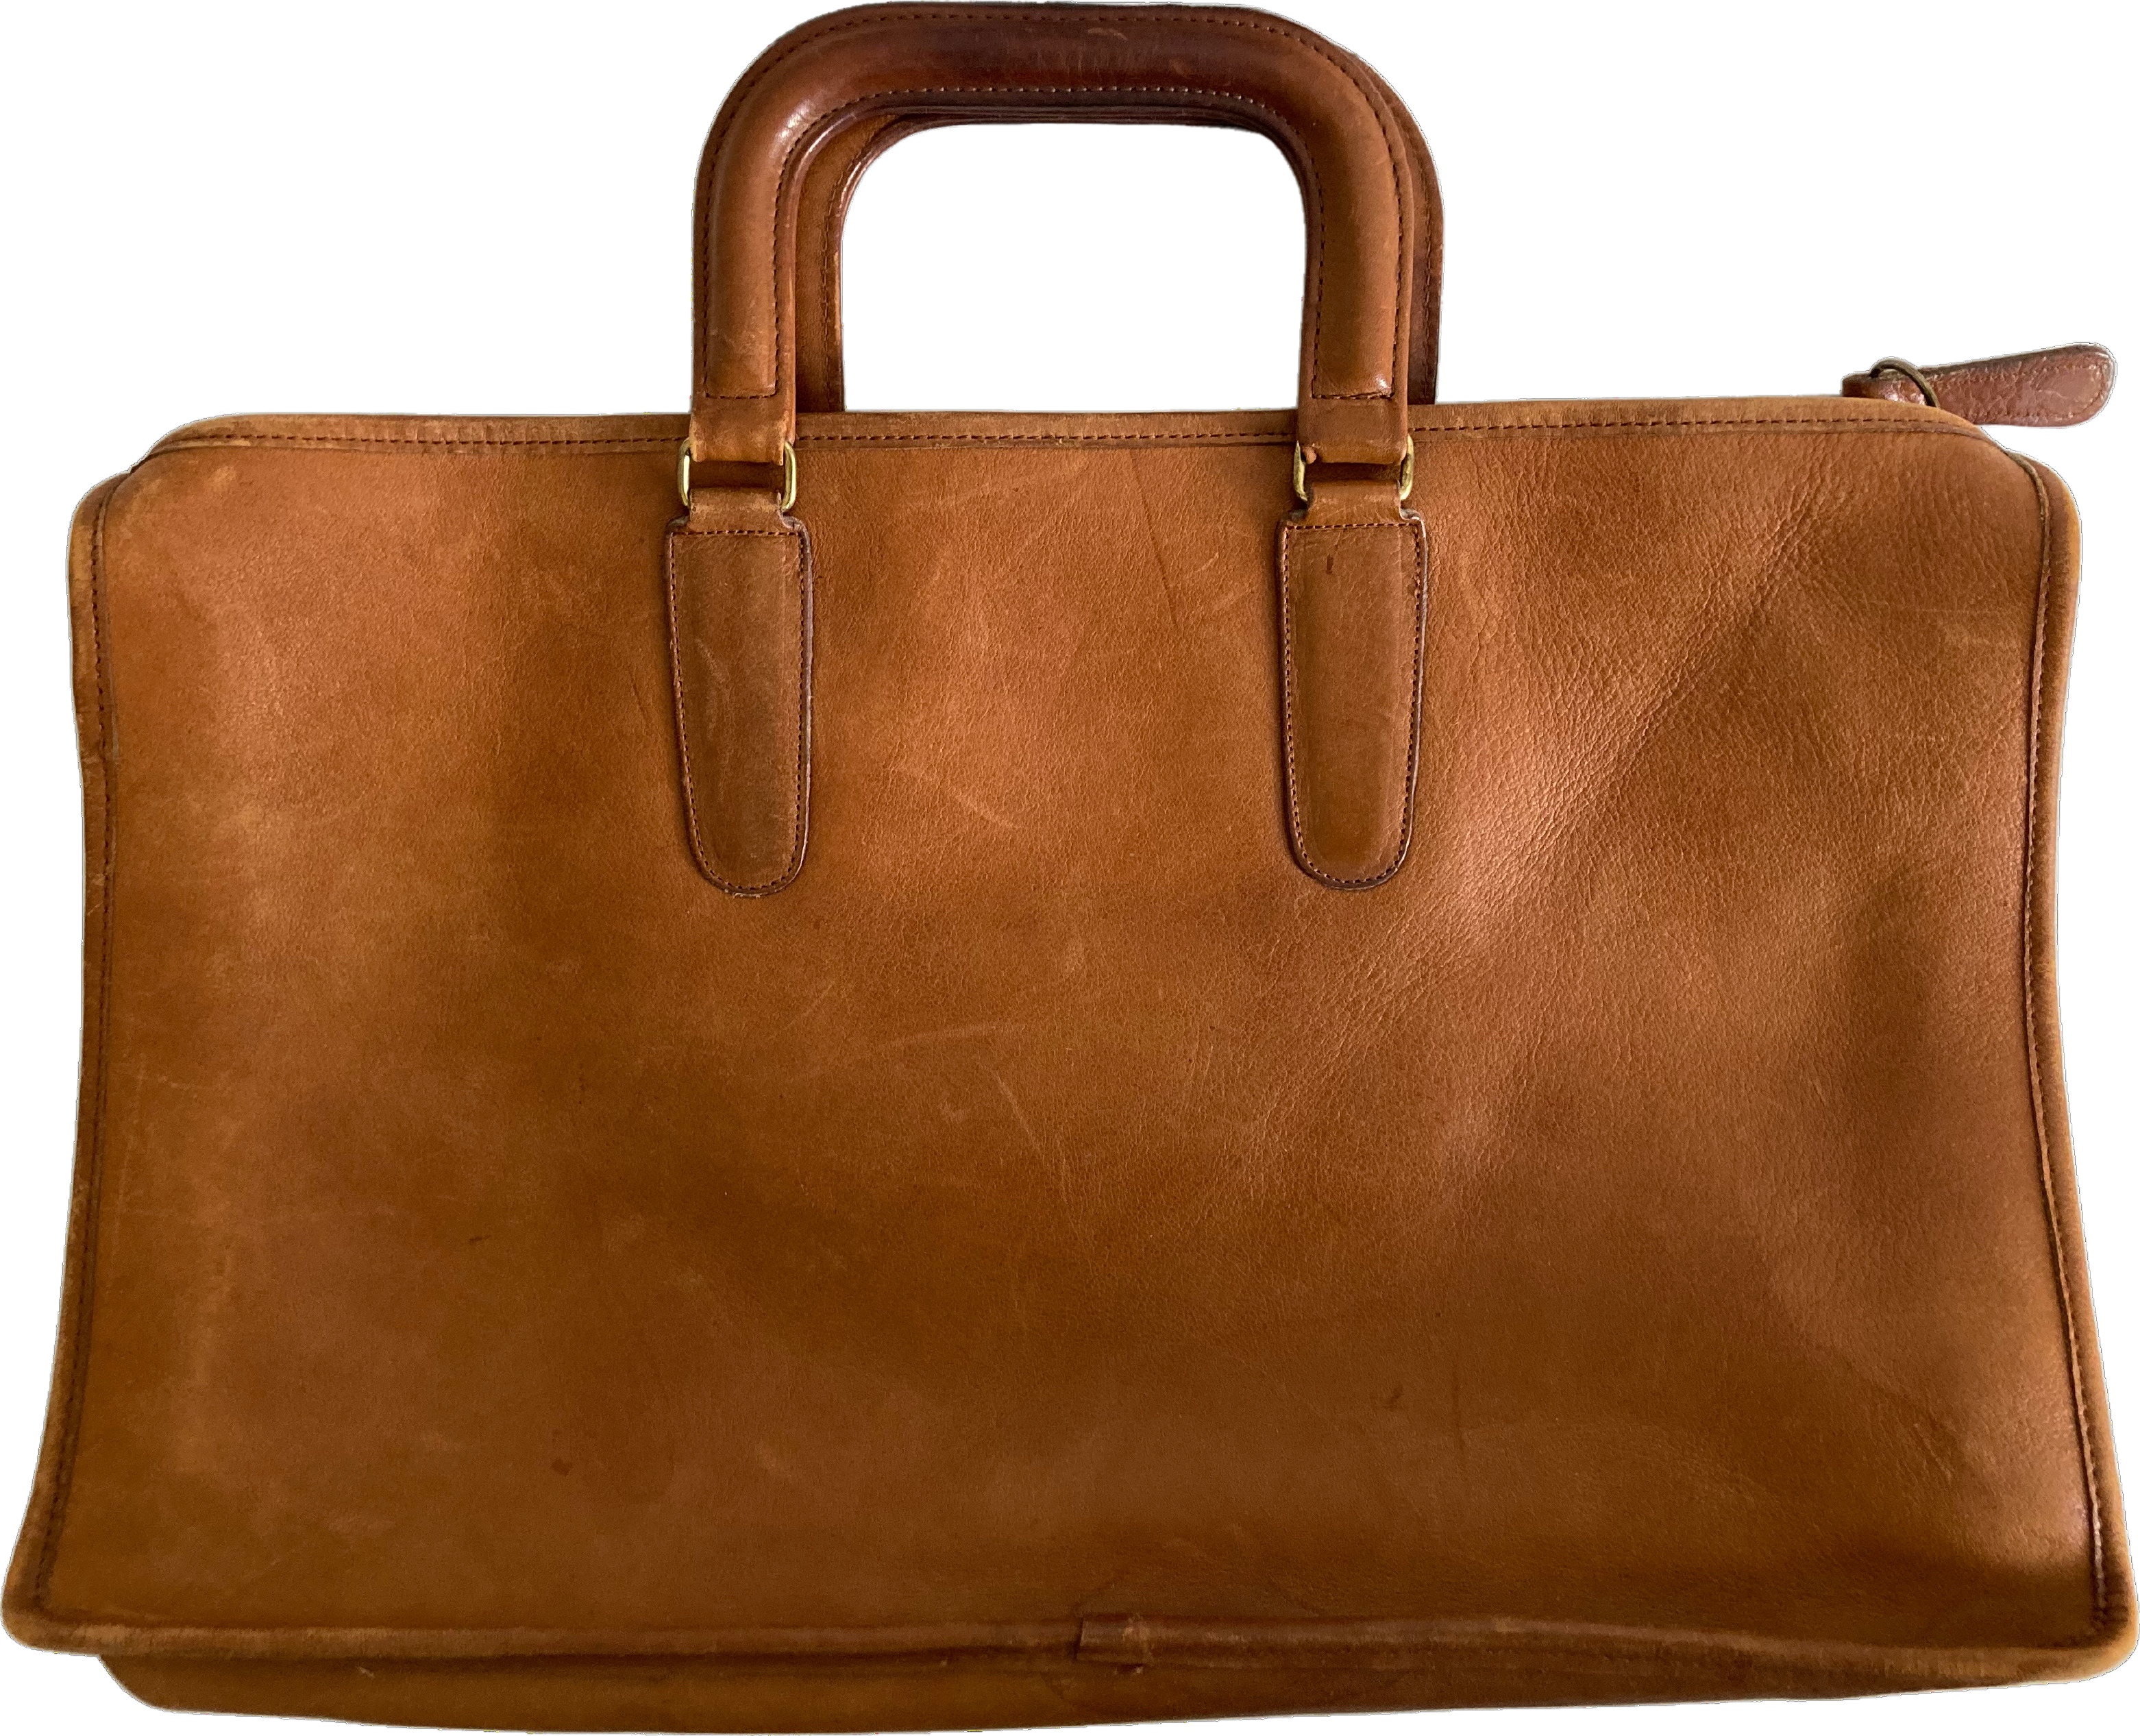 Vintage 90s Briefcase Style Brown Leather Bag By Coach